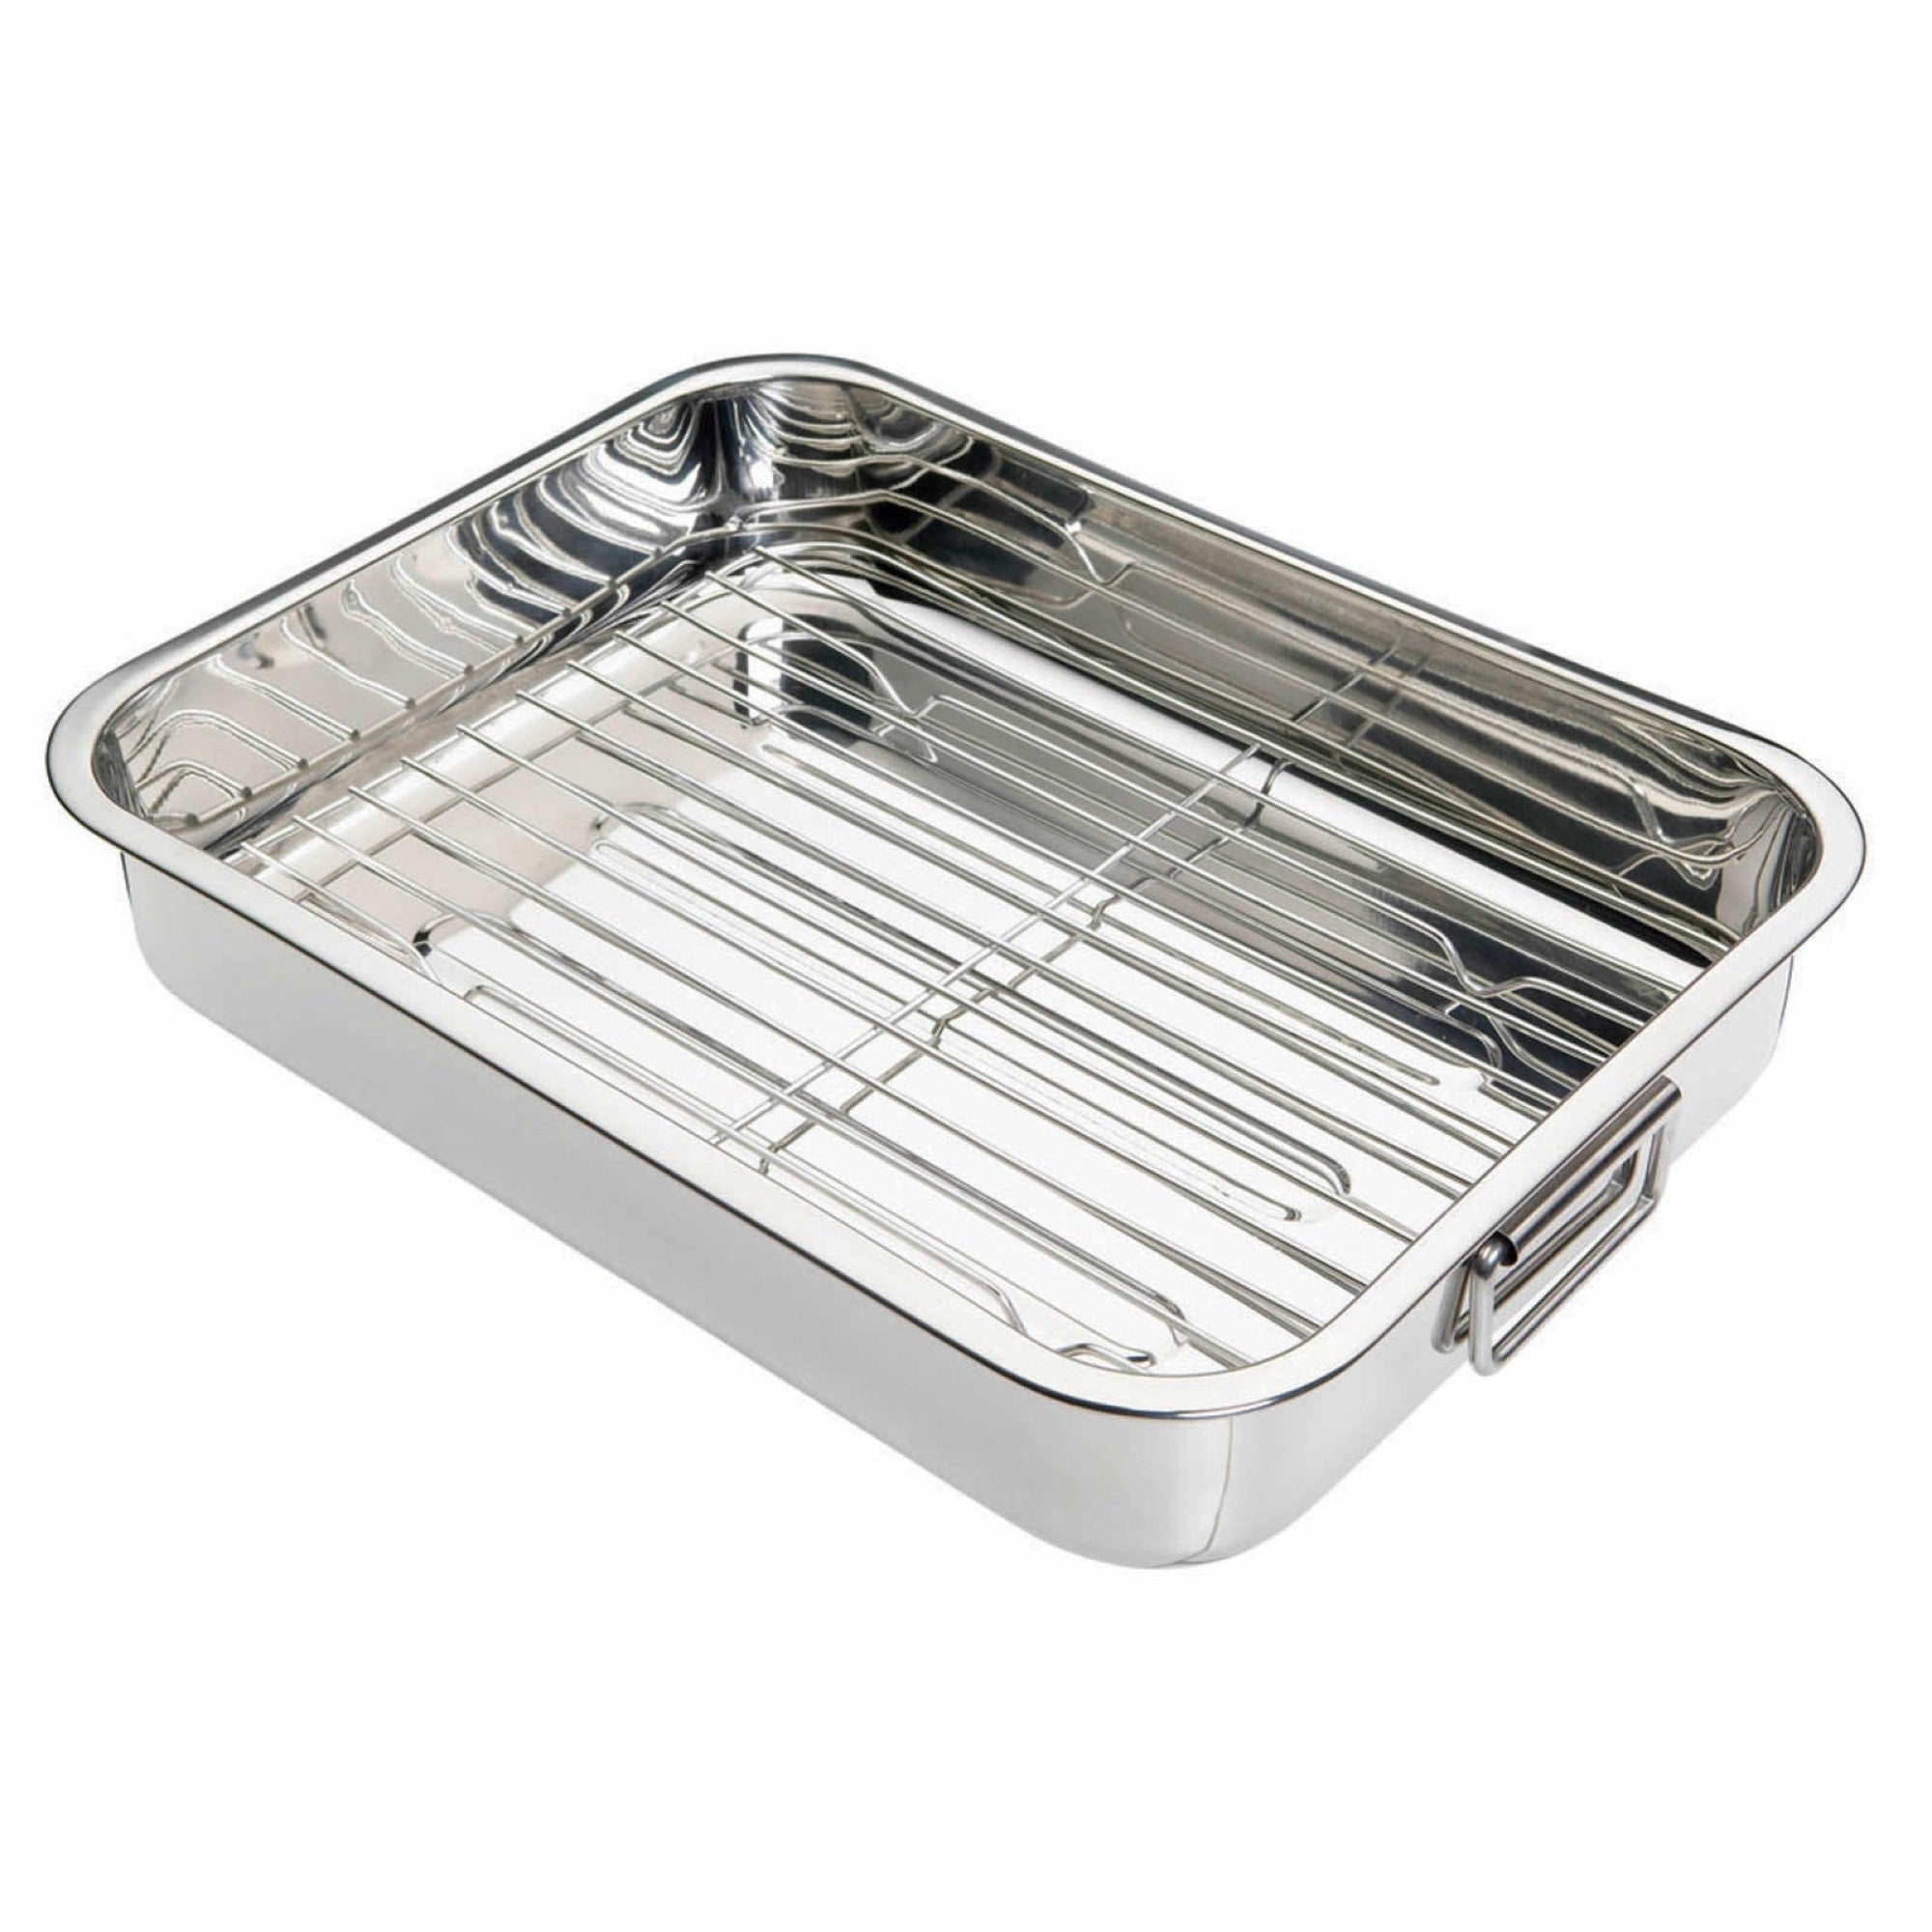 KitchenCraft Stainless Steel 38cm x 27.5cm Roasting Pan with Removable Rack - The Cooks Cupboard Ltd